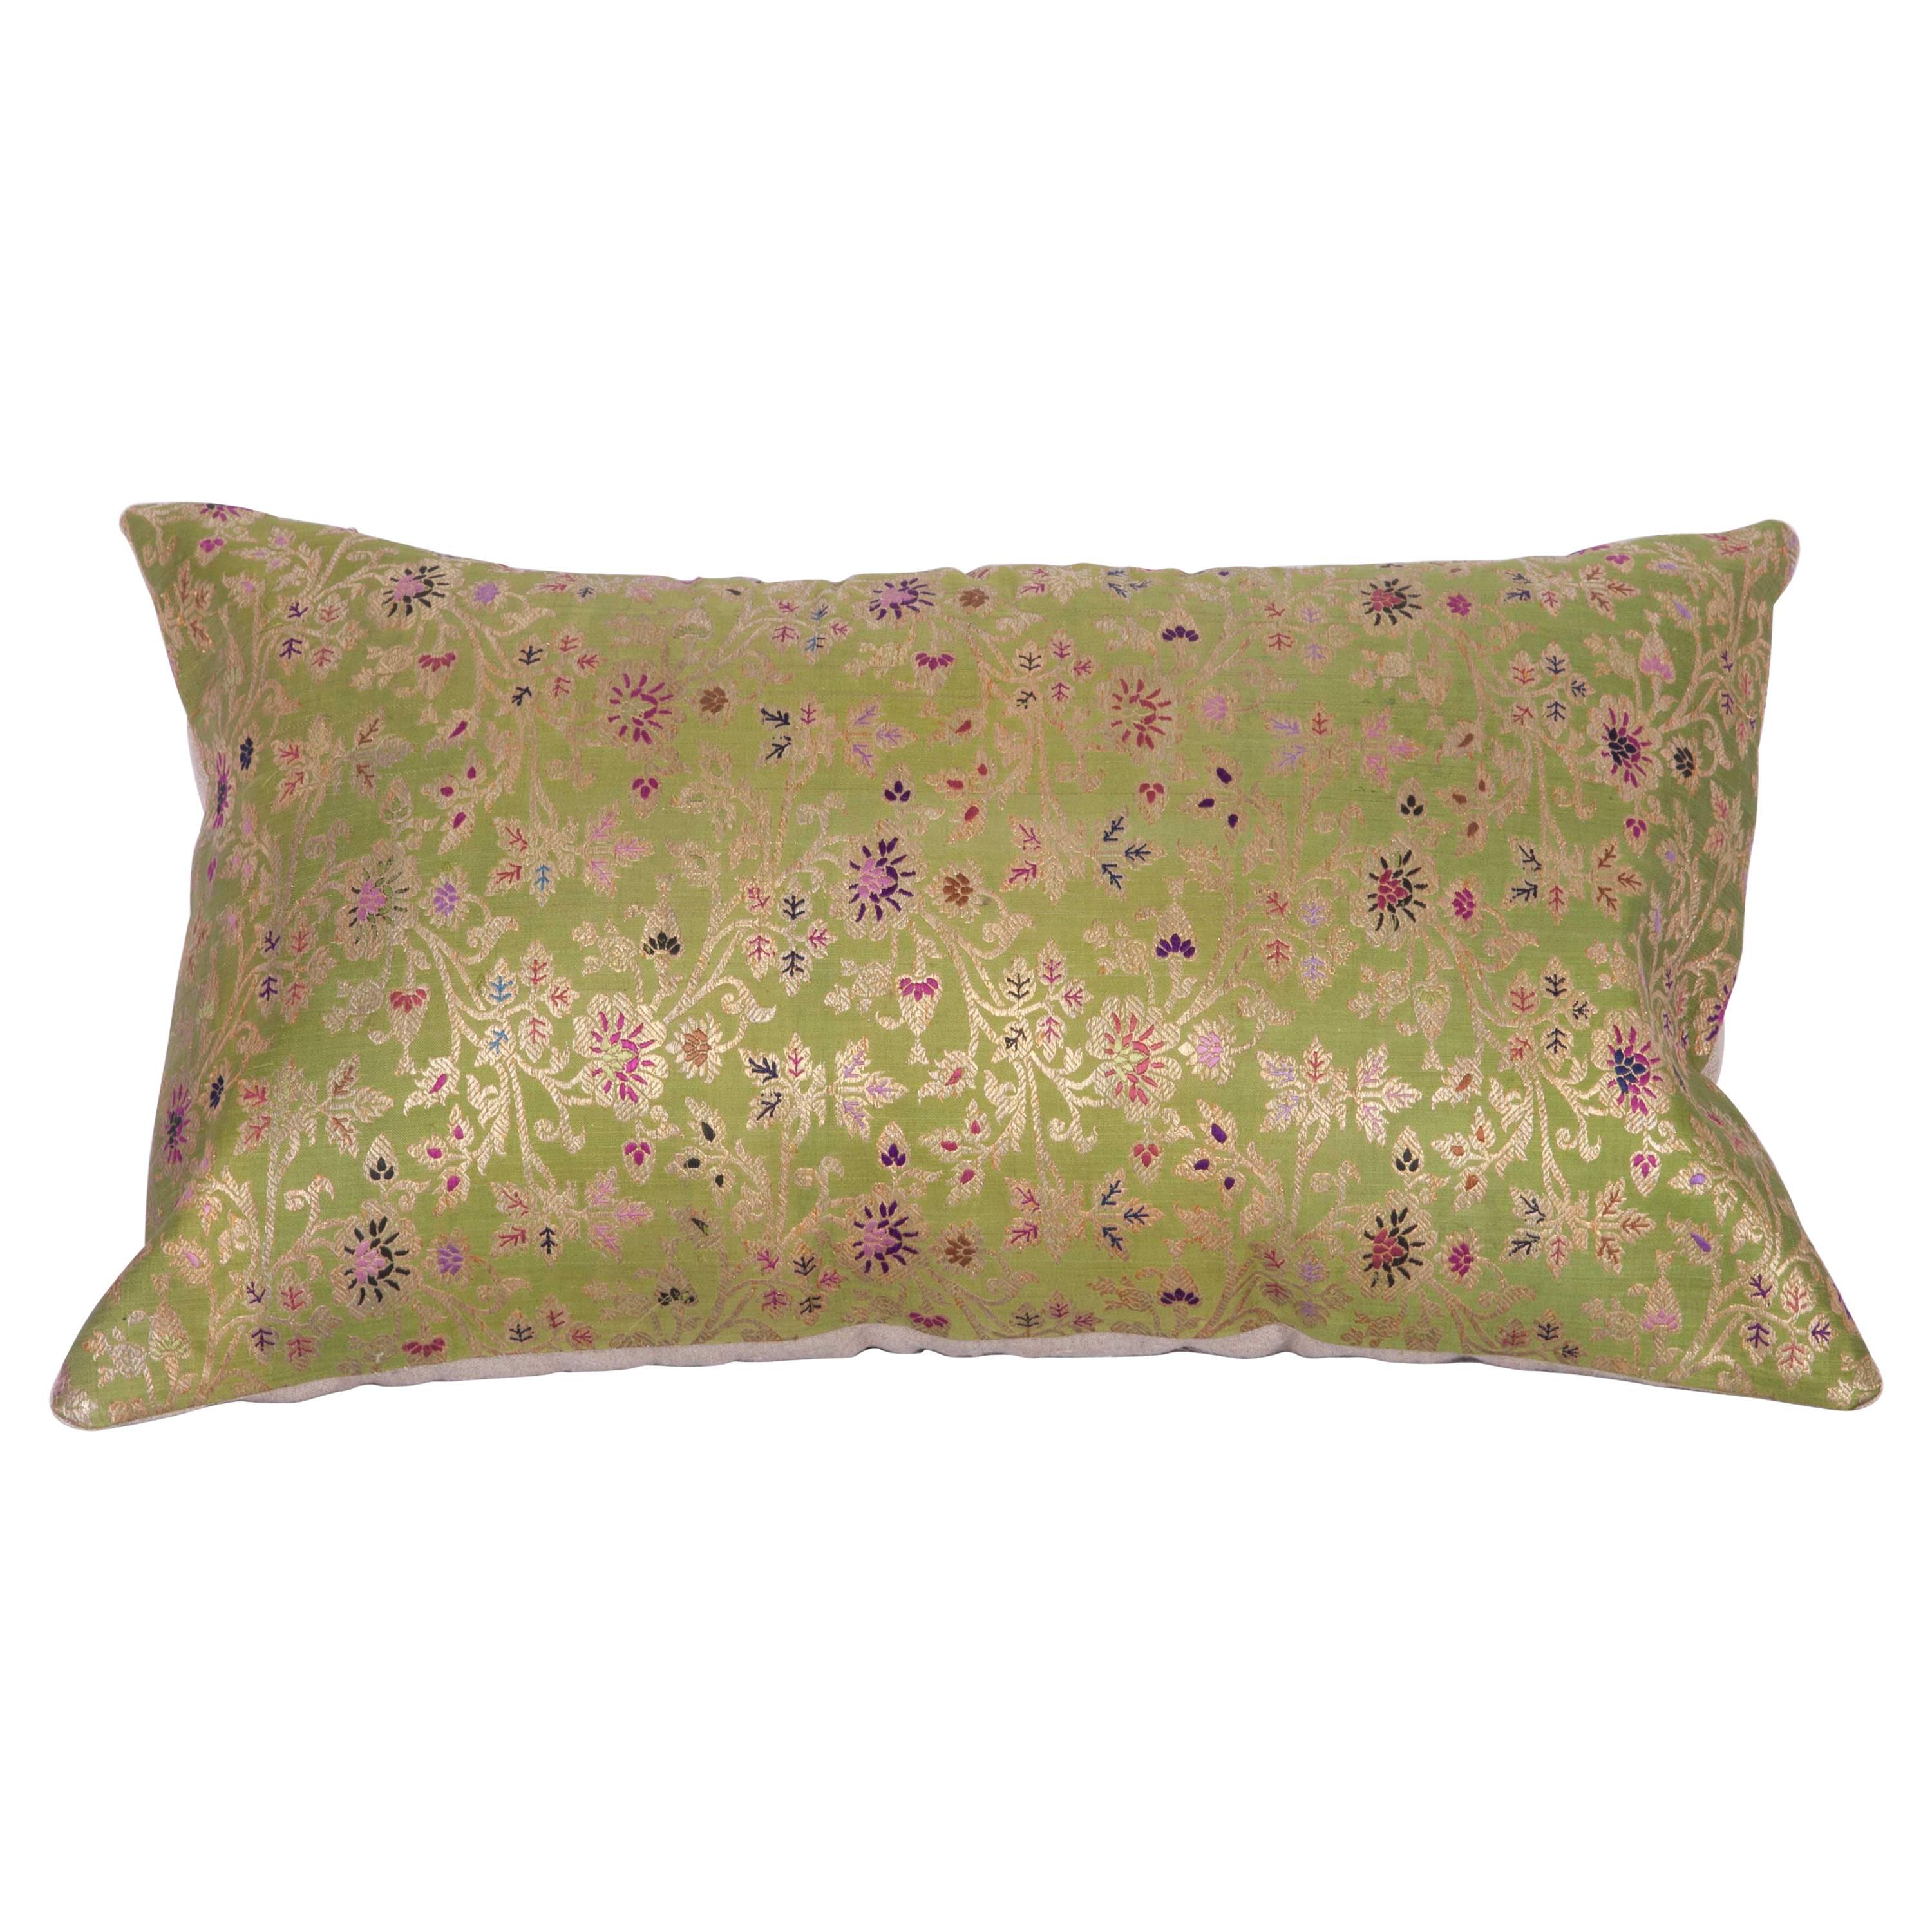 Antique Pillow Made Out of a 19th Century Persian Brocade